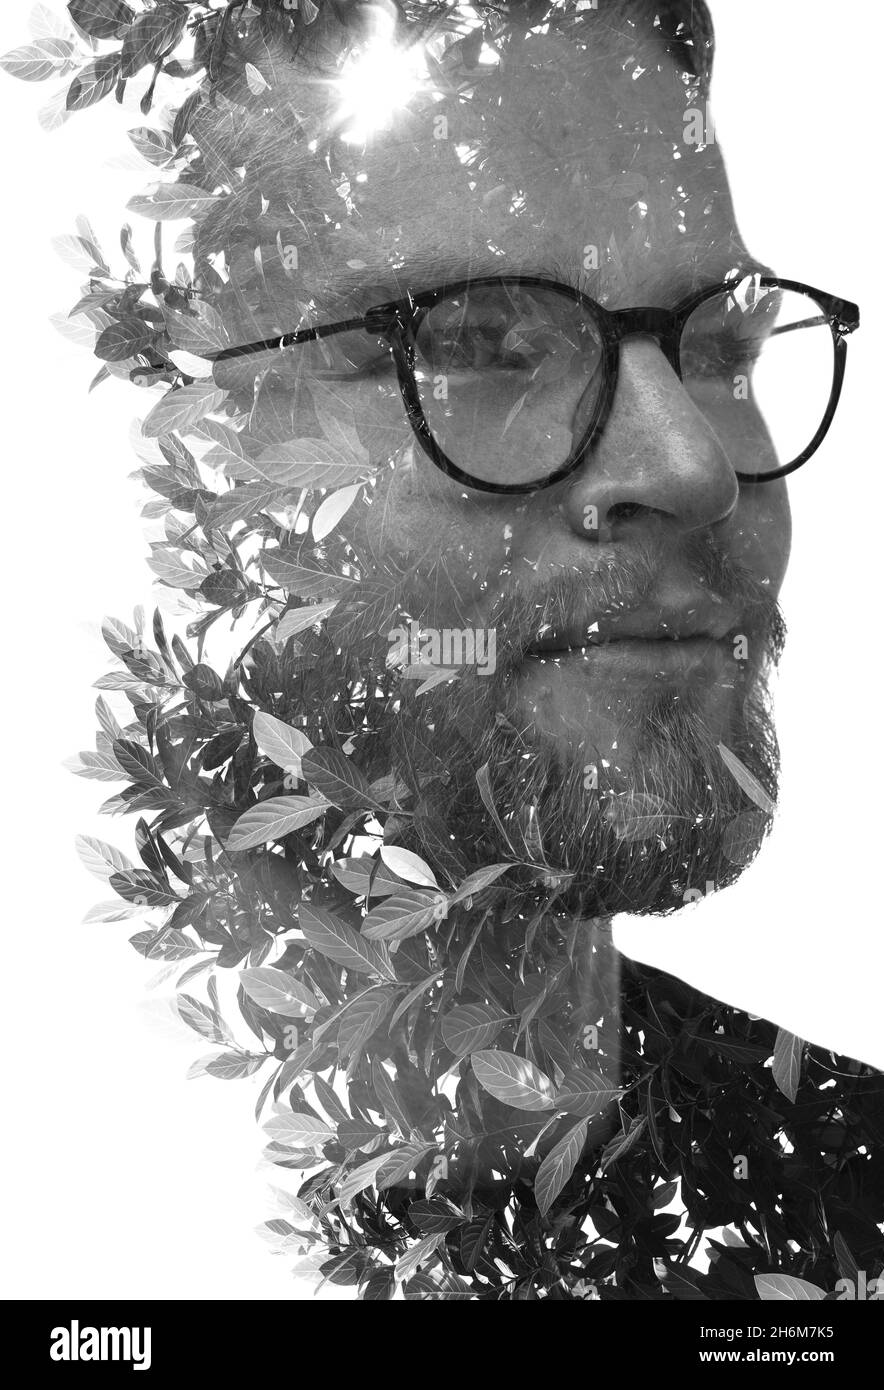 A double exposure portrait of a young man combined with foliage. Stock Photo